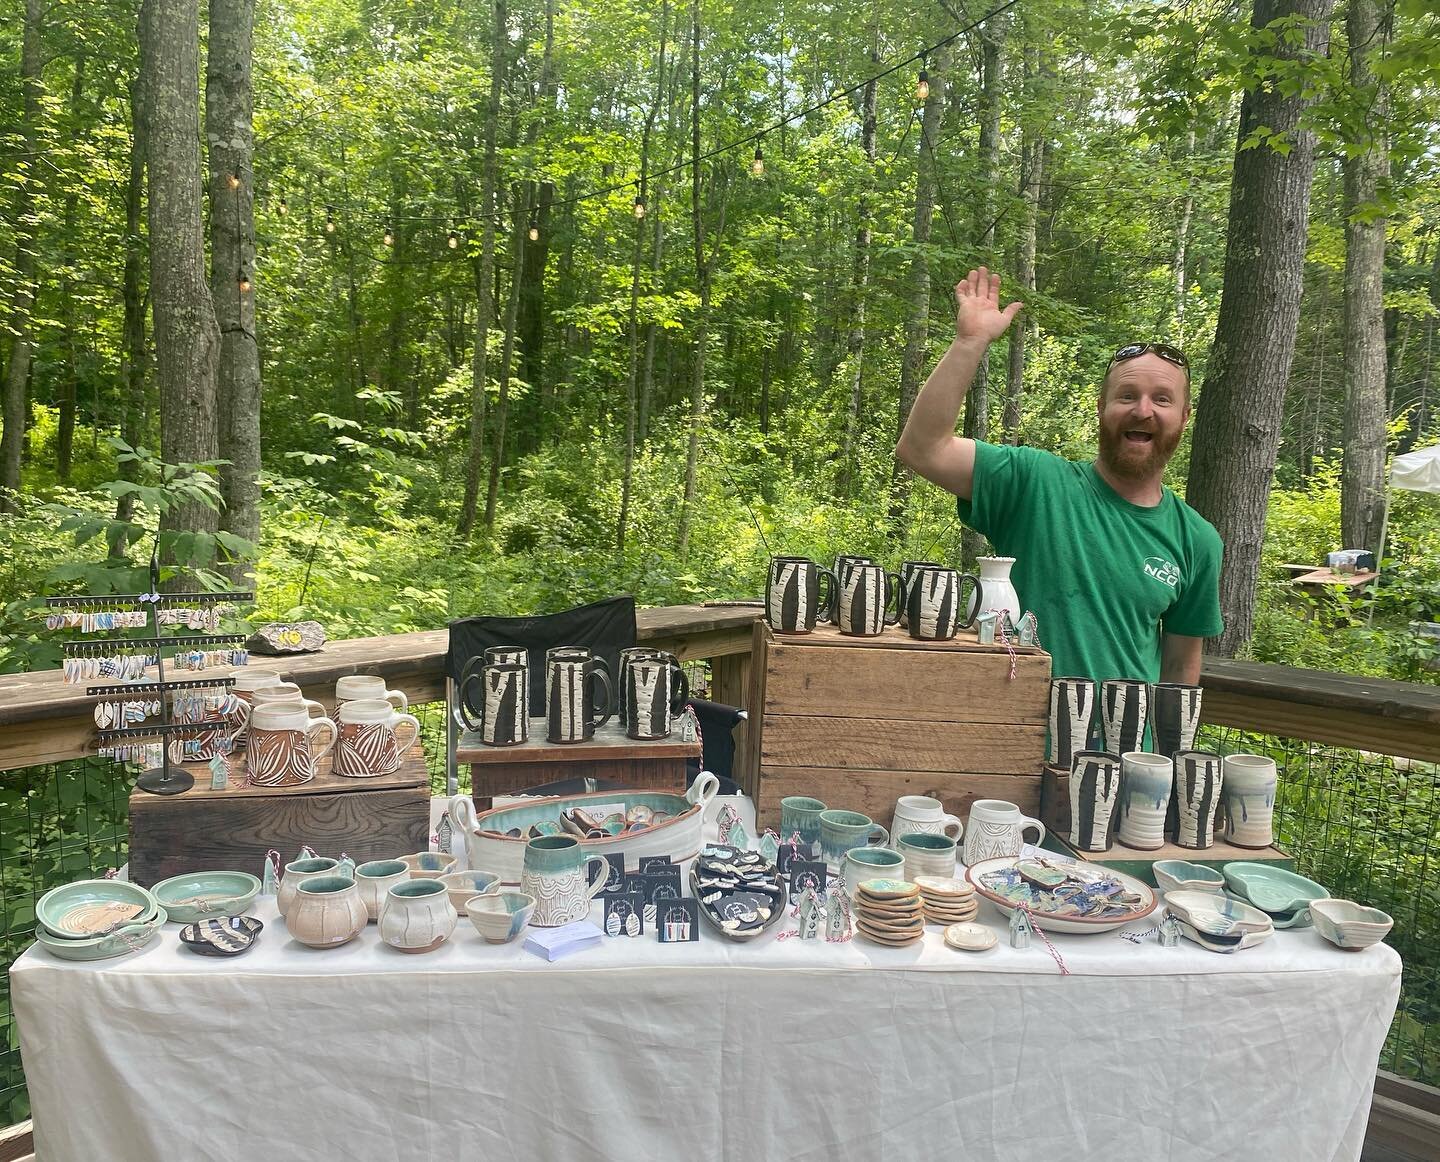 Oh hi!  We&rsquo;re at @thepourfarm today from 1-5 for a lil pop up show!  It&rsquo;s a beautiful day to nestle into these shady woods and enjoy an ice cold beer while perusing some quality Maine made goods.  The way life should be!! Big thanks to th